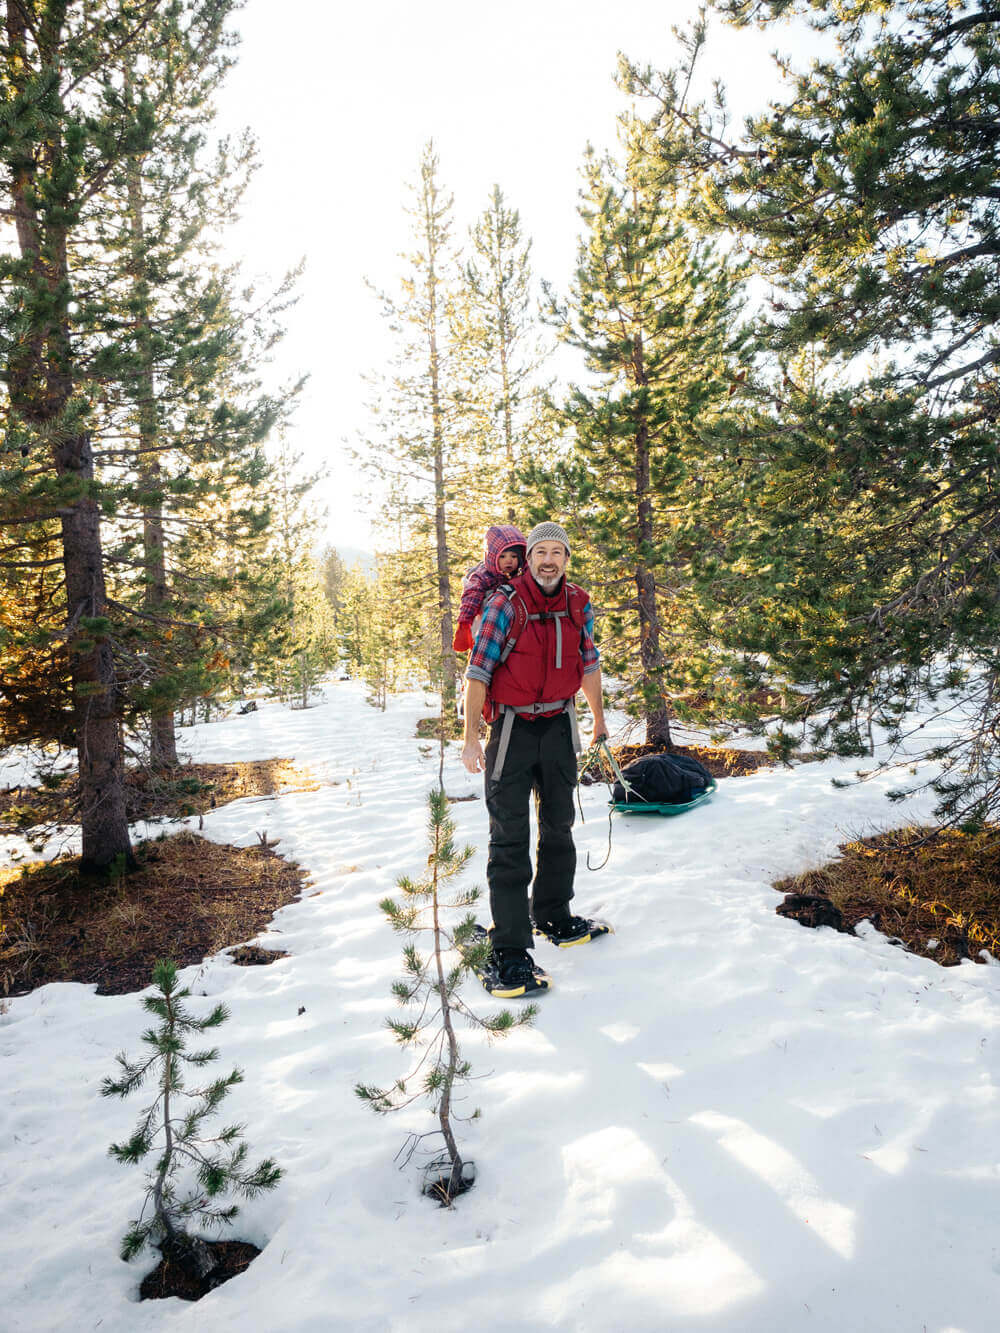 Snowshoeing in the national forest